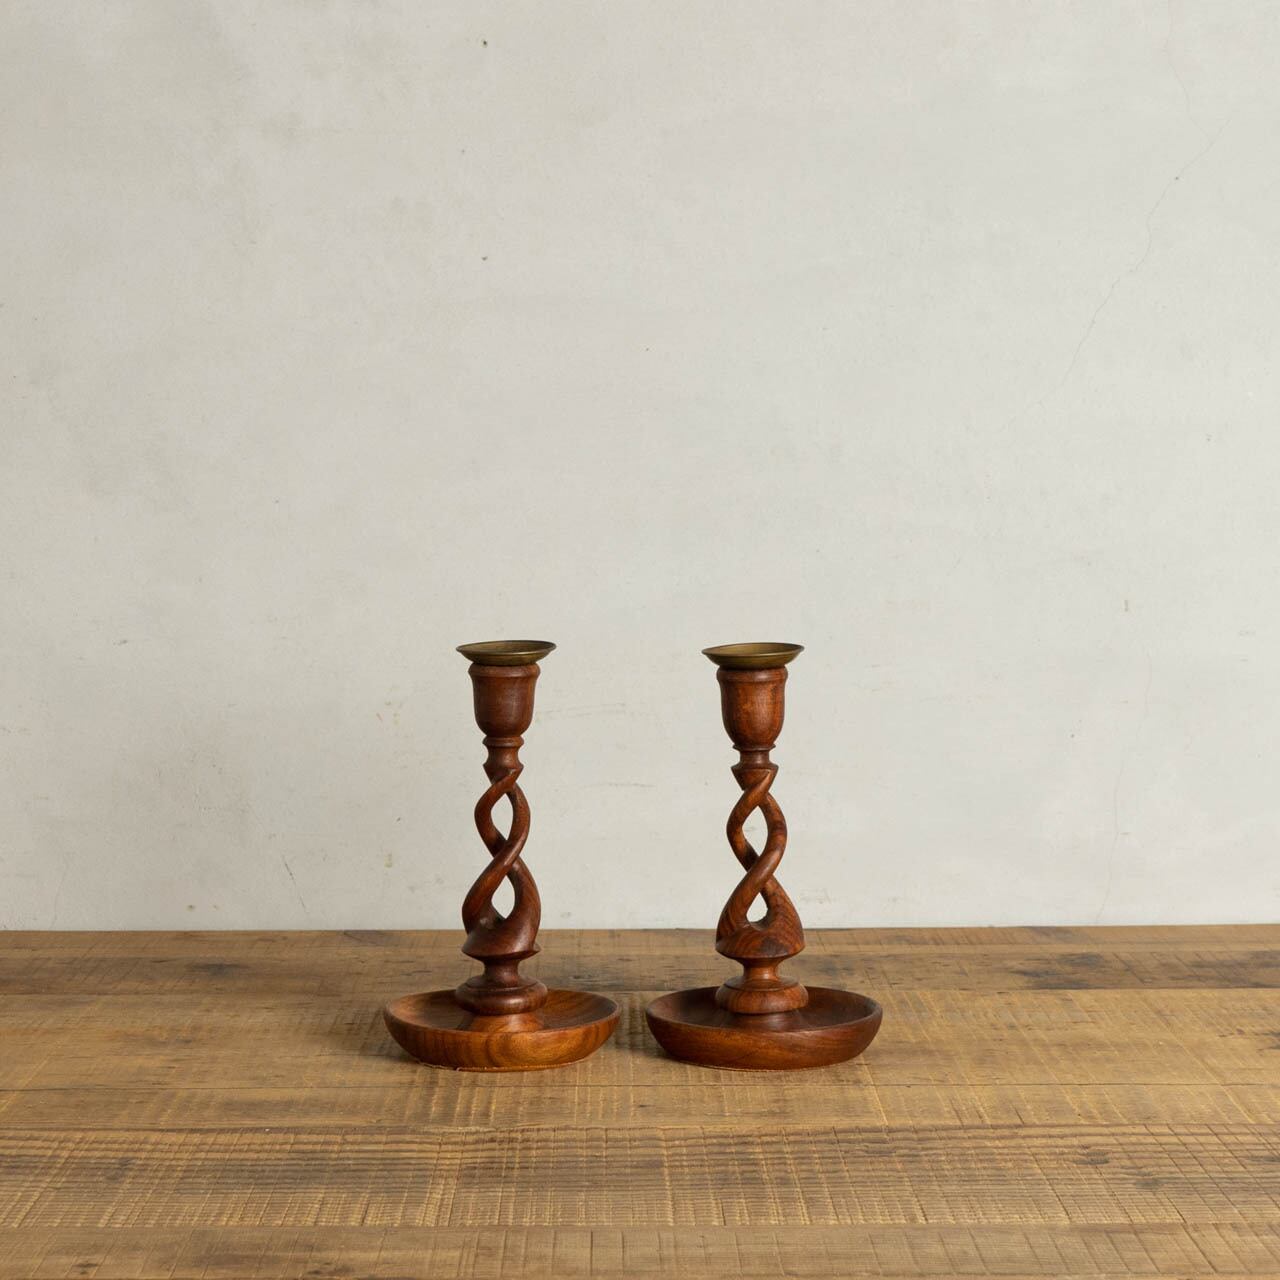 Candle Stand Set / キャンドル スタンド セット〈燭台・蝋燭・ロウソク・アンティーク・ヴィンテージ〉 112497 |  SHABBY'S MARKETPLACE　アンティーク・ヴィンテージ 家具や雑貨のお店 powered by BASE